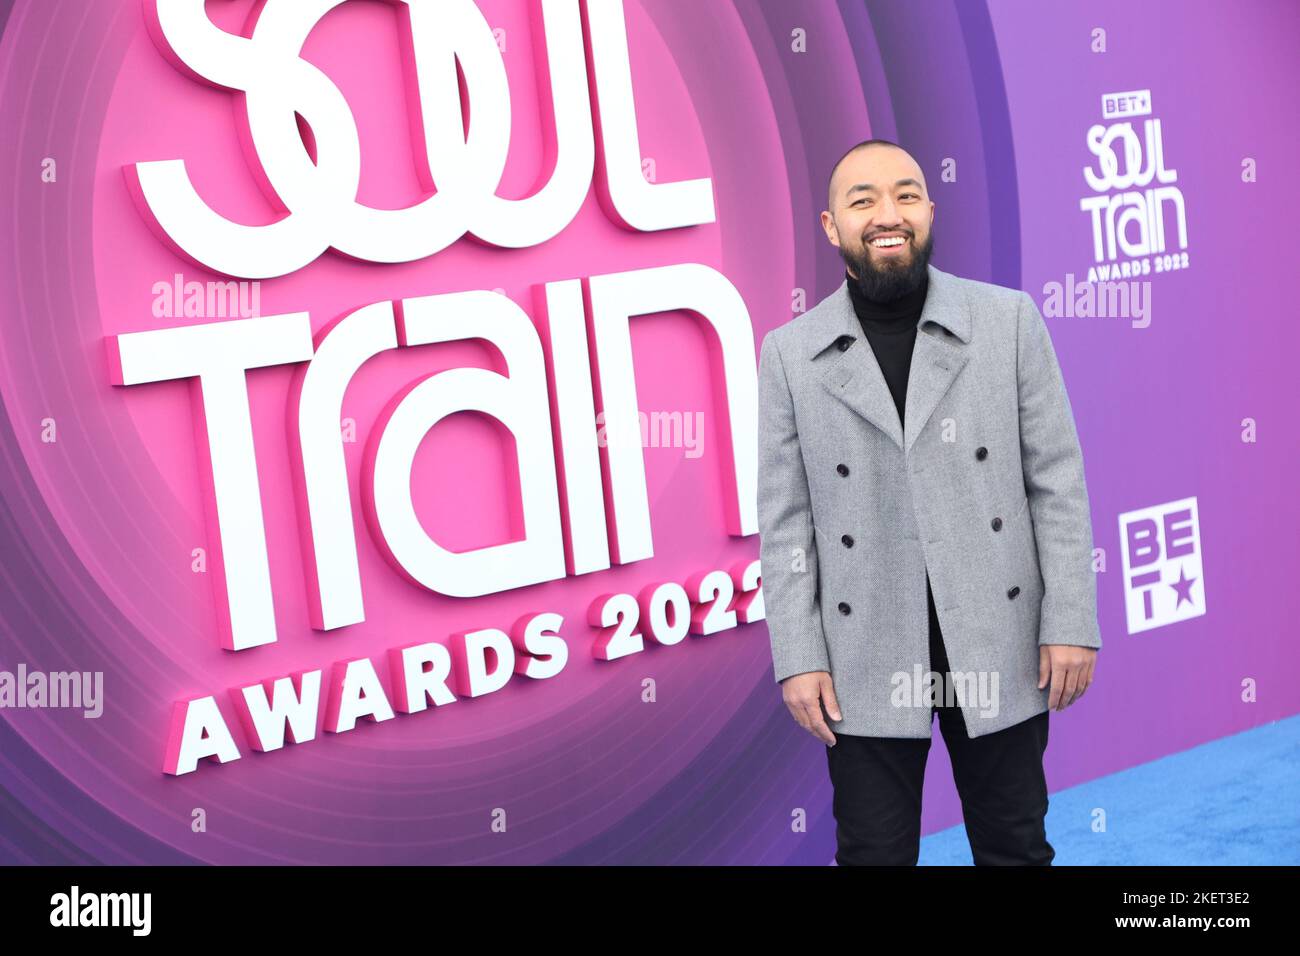 Brian Rikuda, Executive VP of Enterprise Growth Strategy, Business Operations and Programming Strategy bei BET, kommt am Sonntag, den 13. November 2022, zu den Soul Train Awards 2022 in der Orleans Arena im Orleans Hotel and Casino in Las Vegas, Nevada, an. Foto von James Atoa/UPI Stockfoto